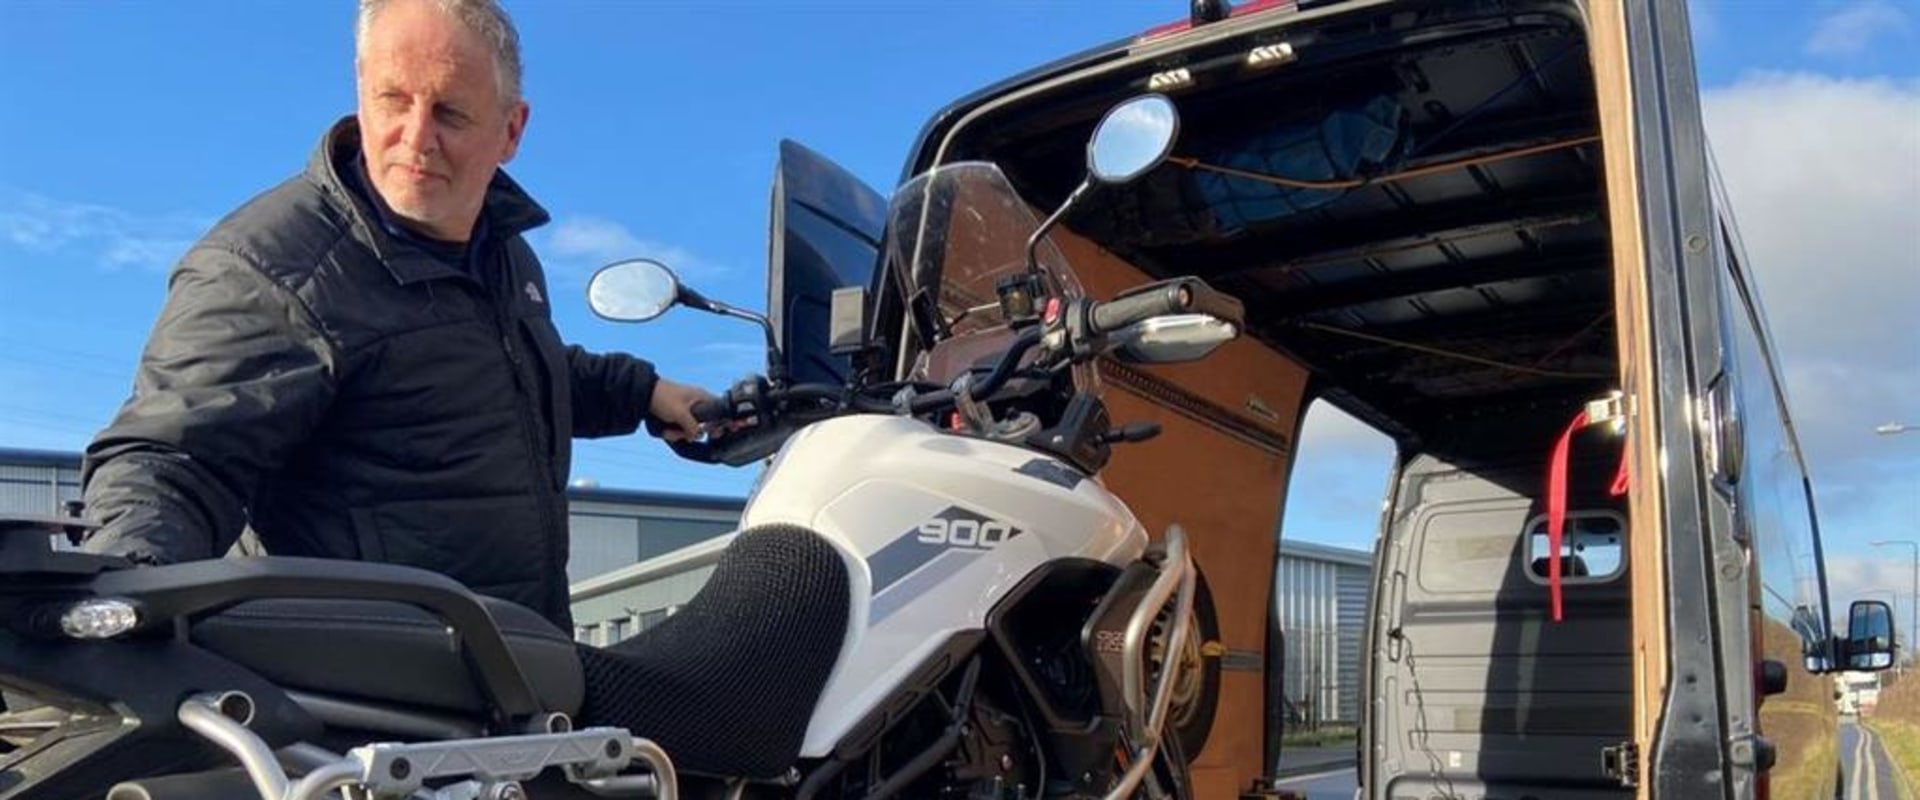 Transporting Motorcycles with Sidecars or Trailers: Everything You Need to Know